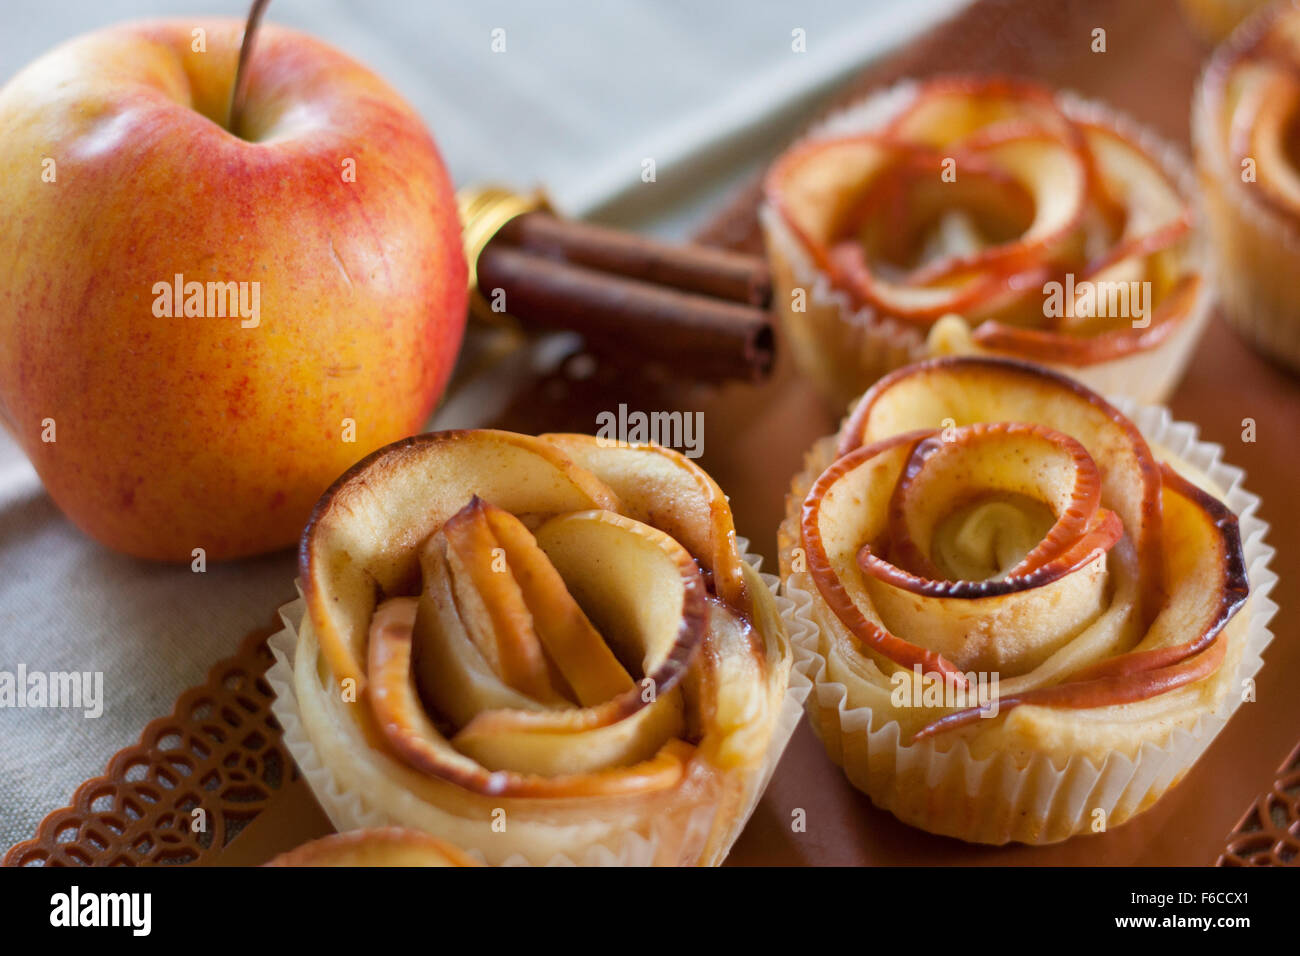 Rose shaped apple sweets flavored with cinnamon. Stock Photo